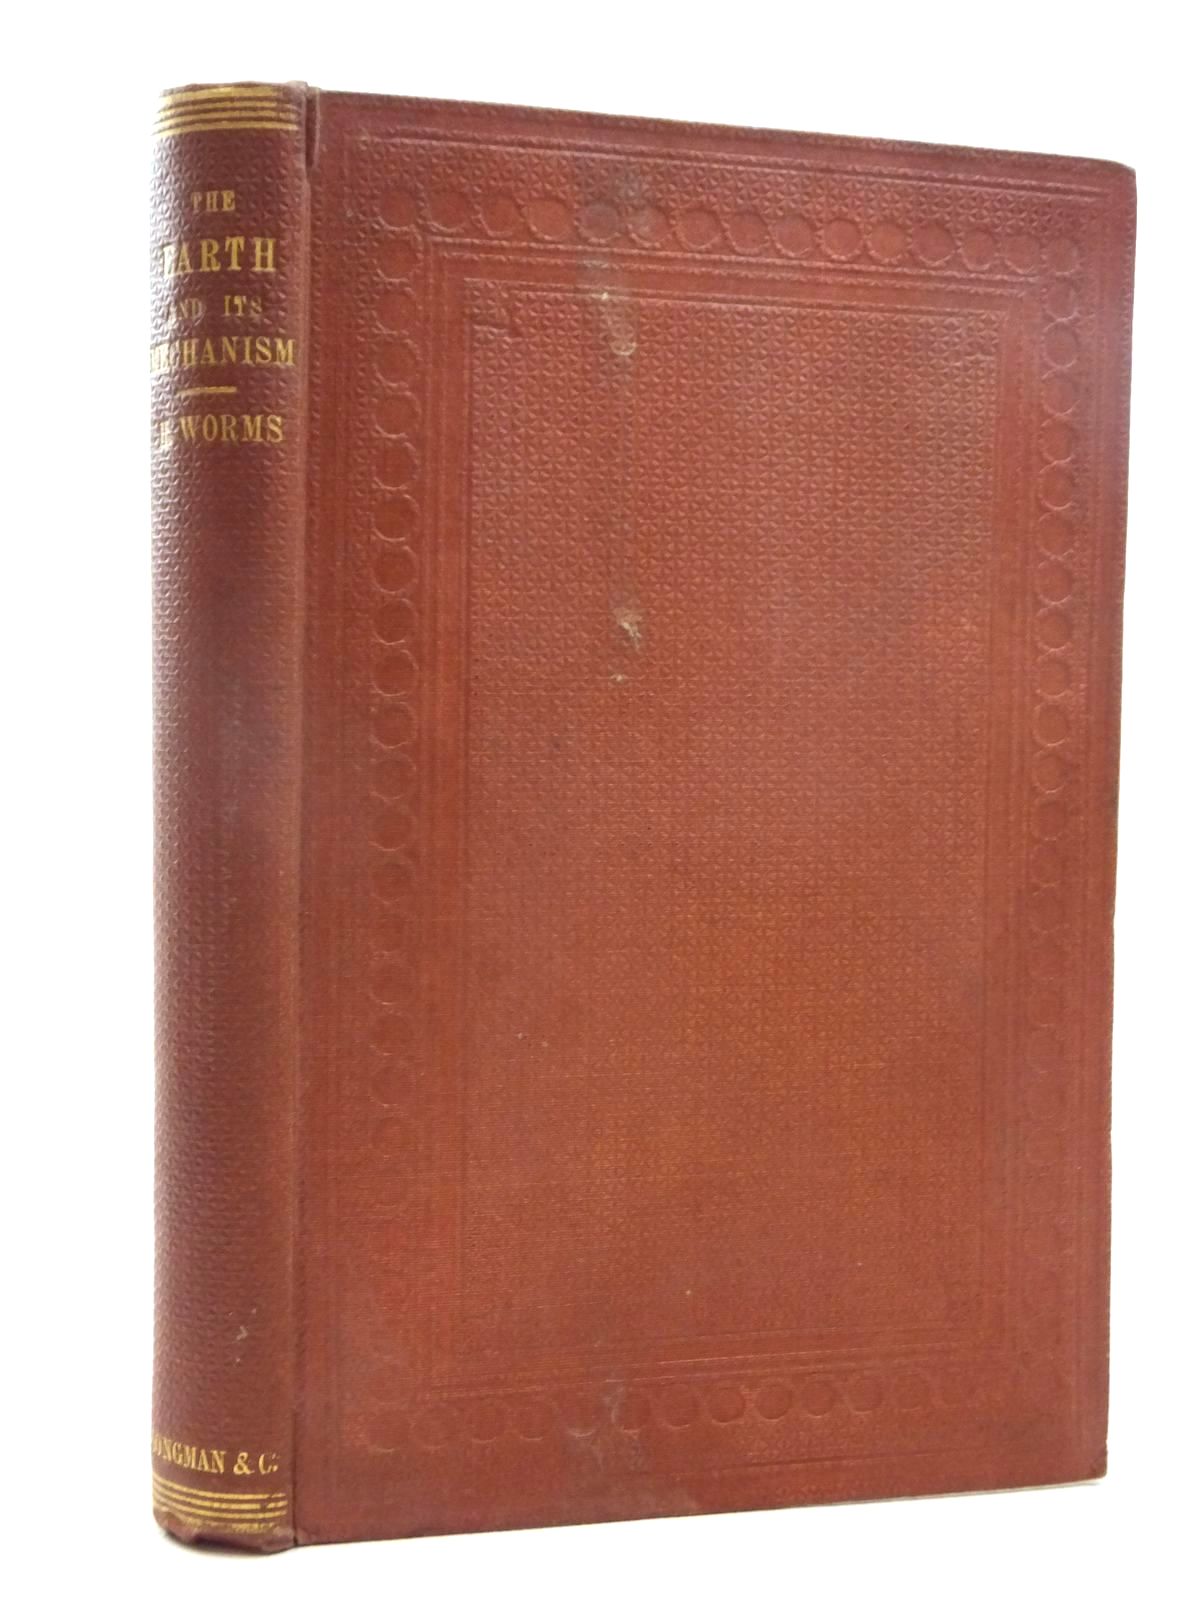 Photo of THE EARTH AND ITS MECHANISM written by Worms, Henry published by Longman, Green, Longman, Roberts &amp; Green (STOCK CODE: 2123936)  for sale by Stella & Rose's Books